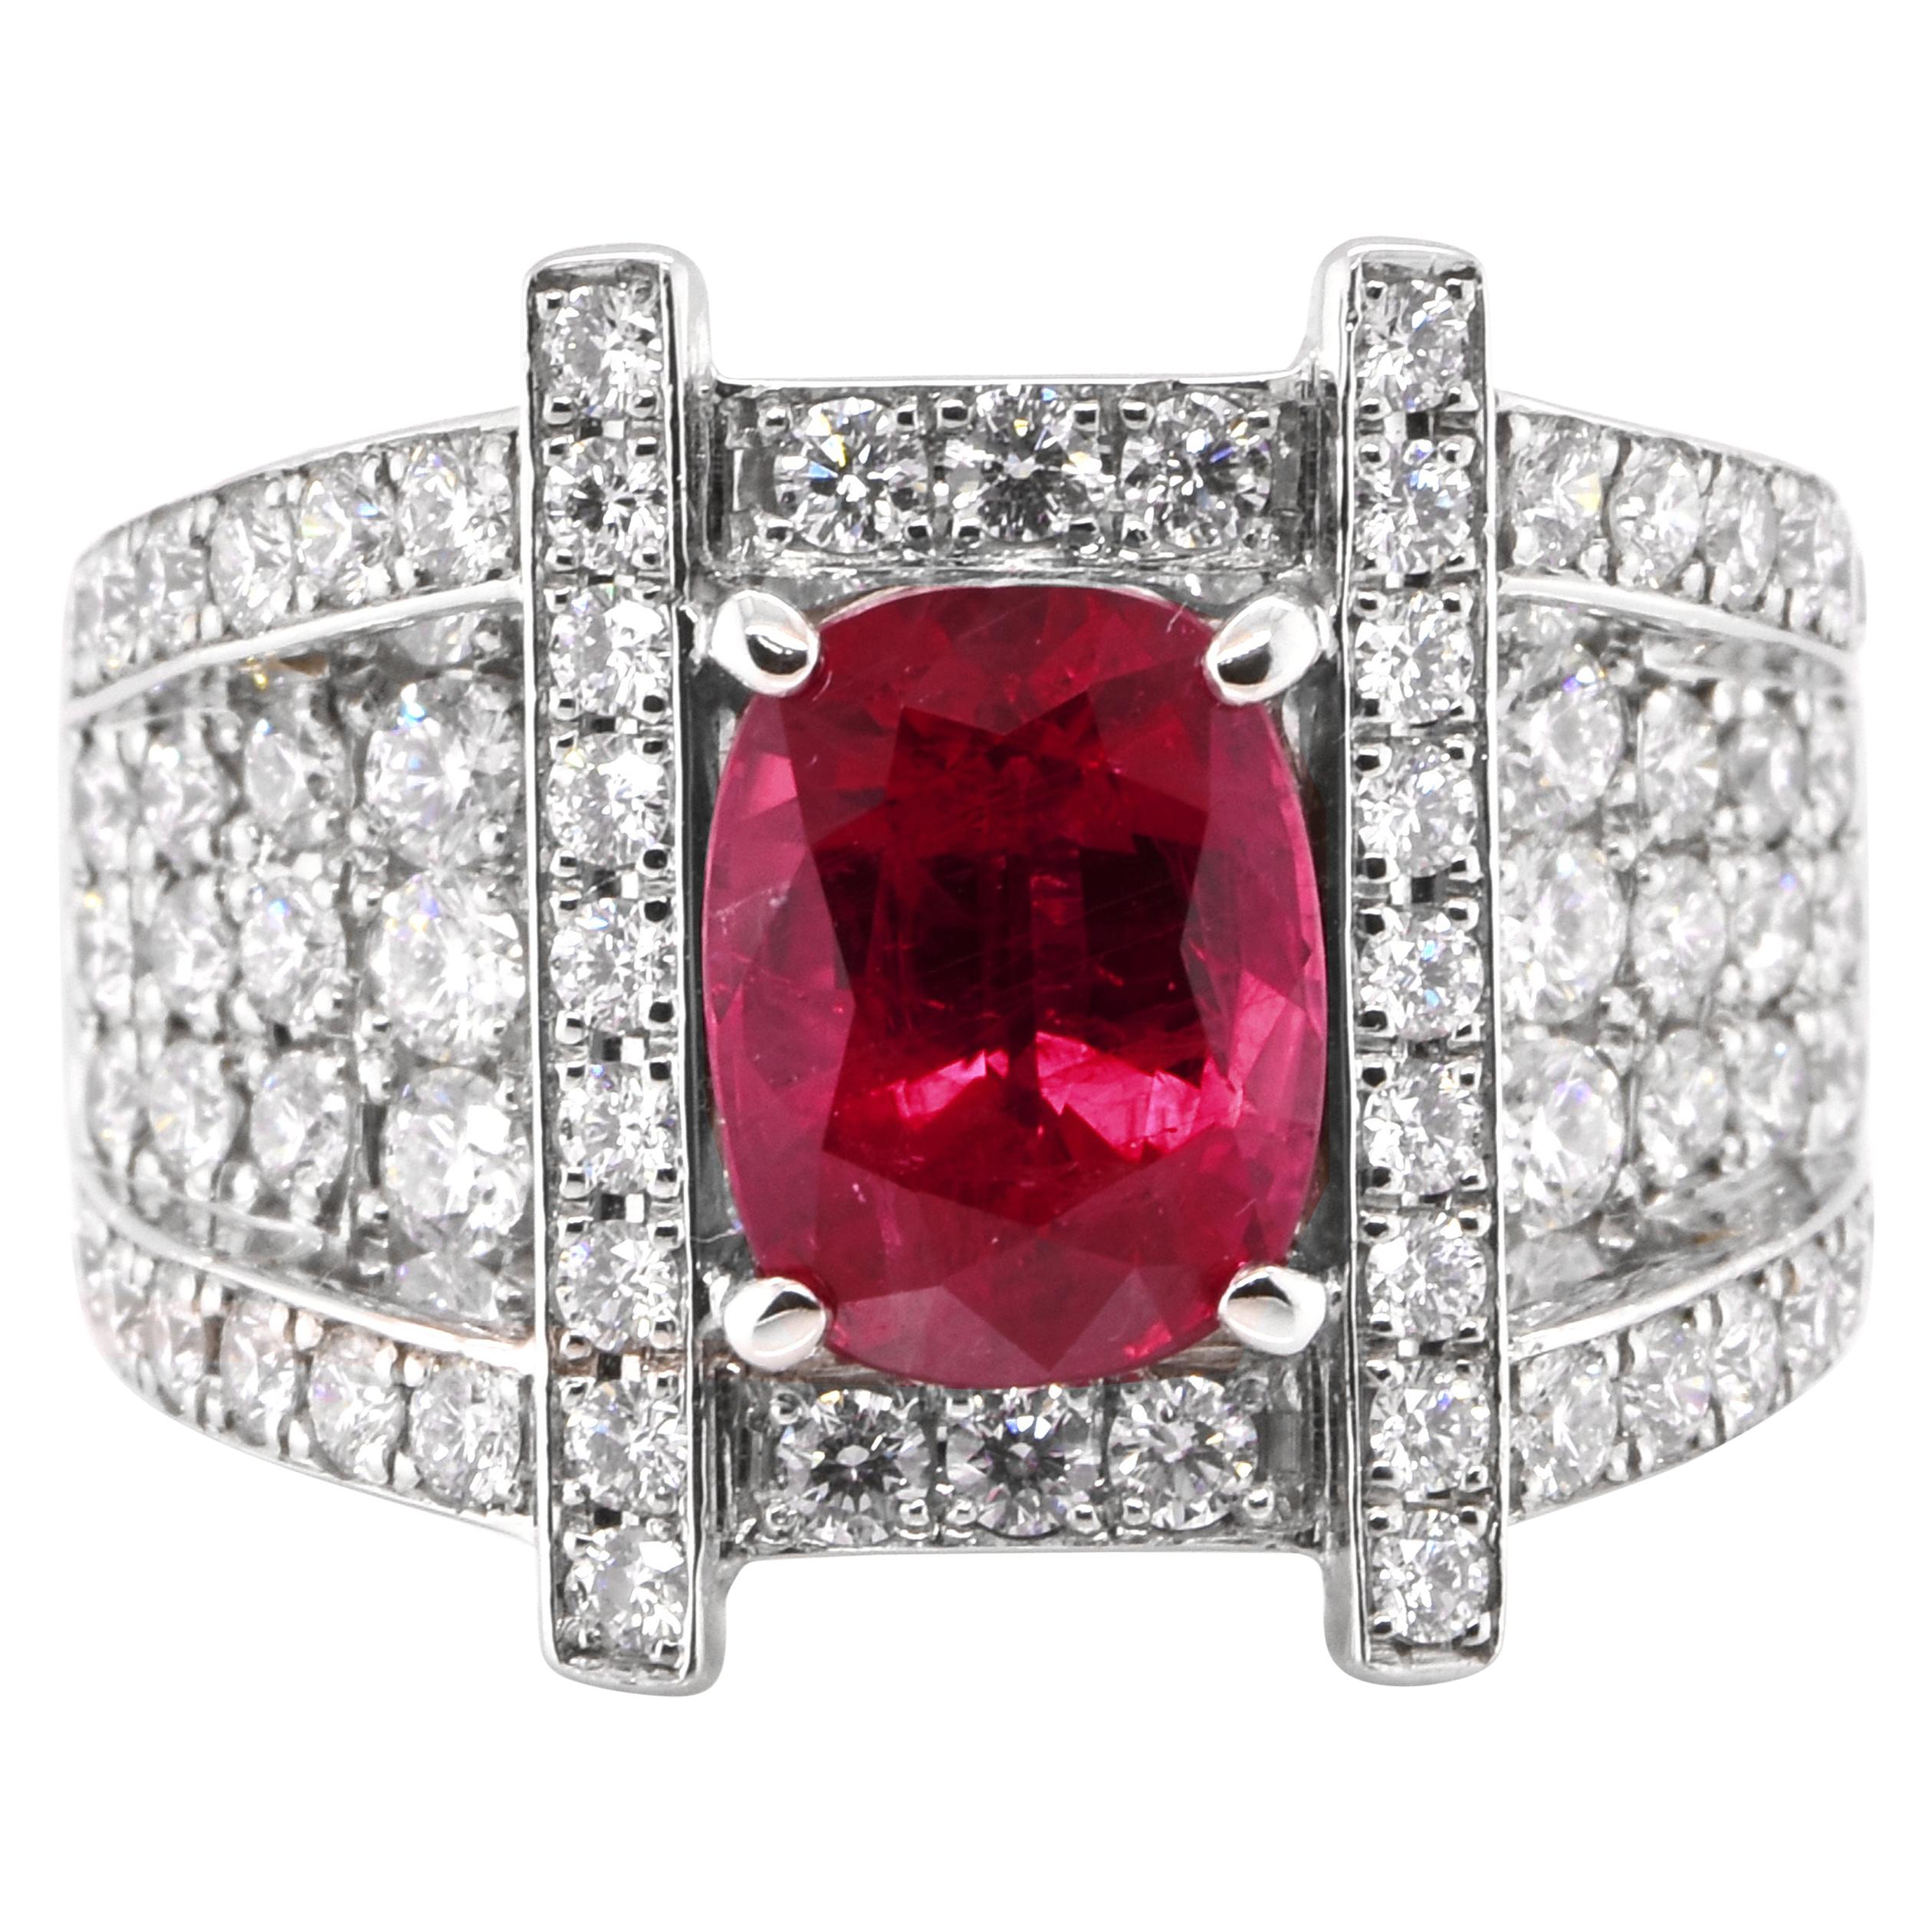 GIA Certified 3.18 Carat Natural Thailand Ruby and Diamond Ring Set in Platinum